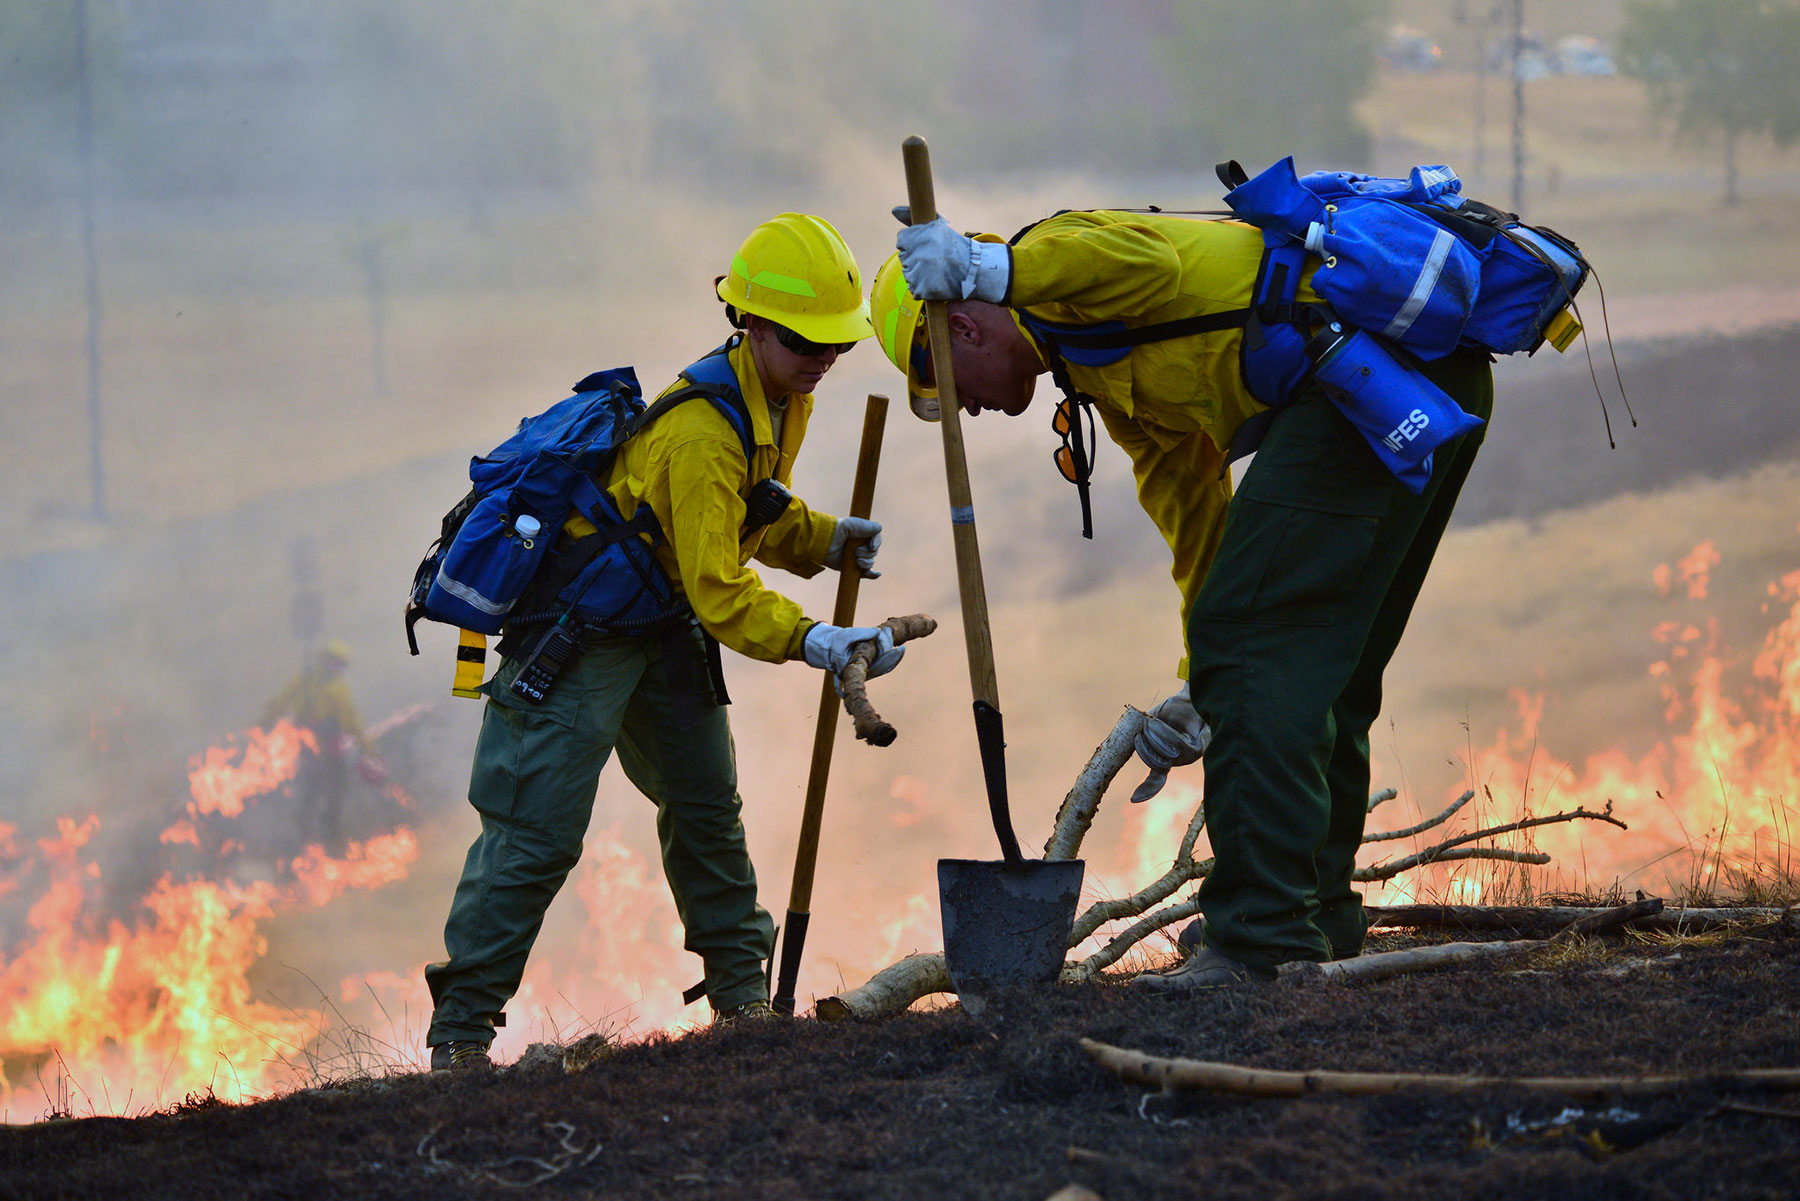 Oregon Army National Guard Soldiers work together during a wild land fire field training exercise held at the Oregon Department of Public Safety Standards (DPSST) and Training in Salem, Oregon, August 28, 2017. (Oregon Military Department/Leslie Reed.)